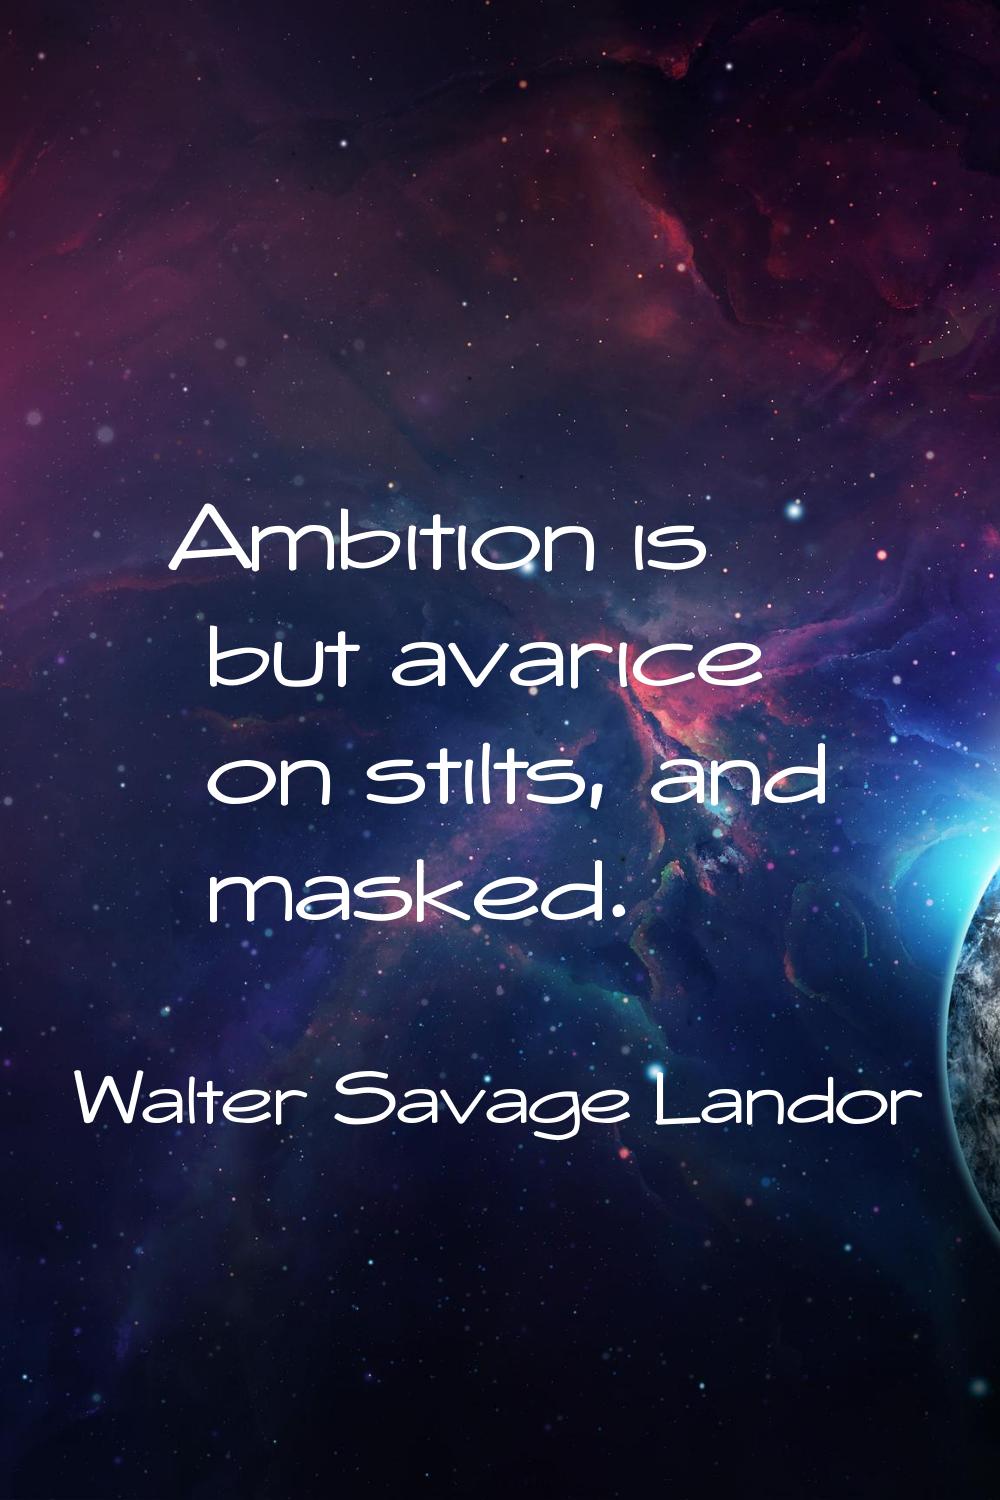 Ambition is but avarice on stilts, and masked.